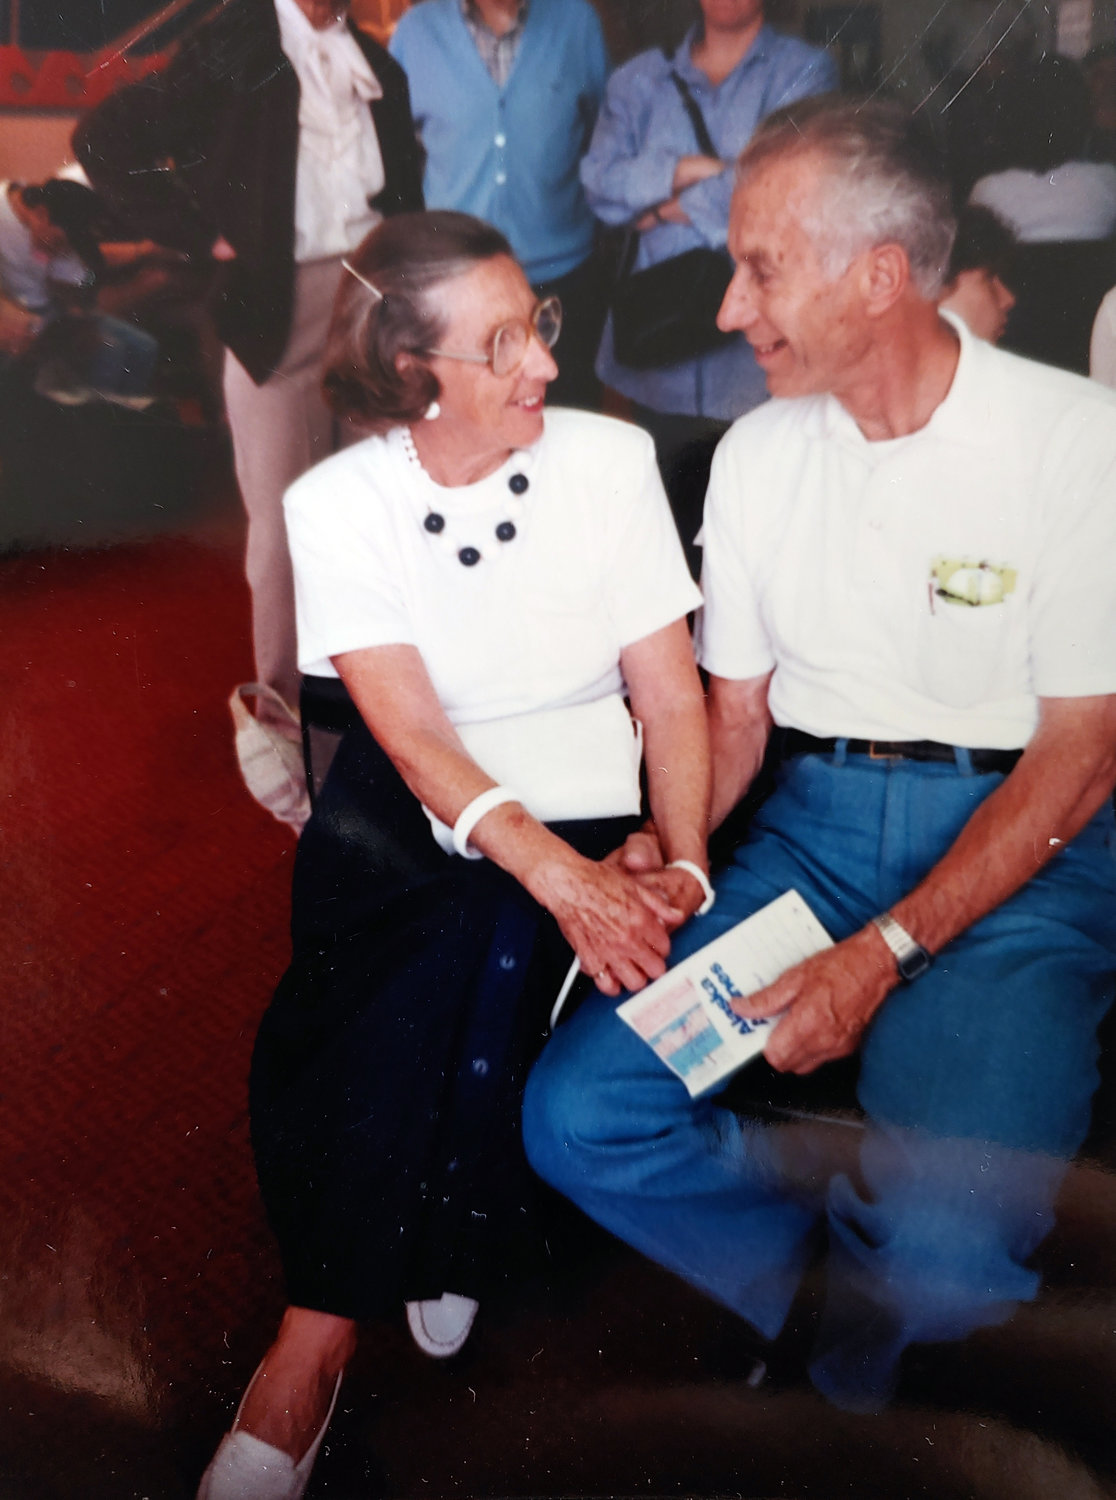 George and Lisa in their later years are pictured.